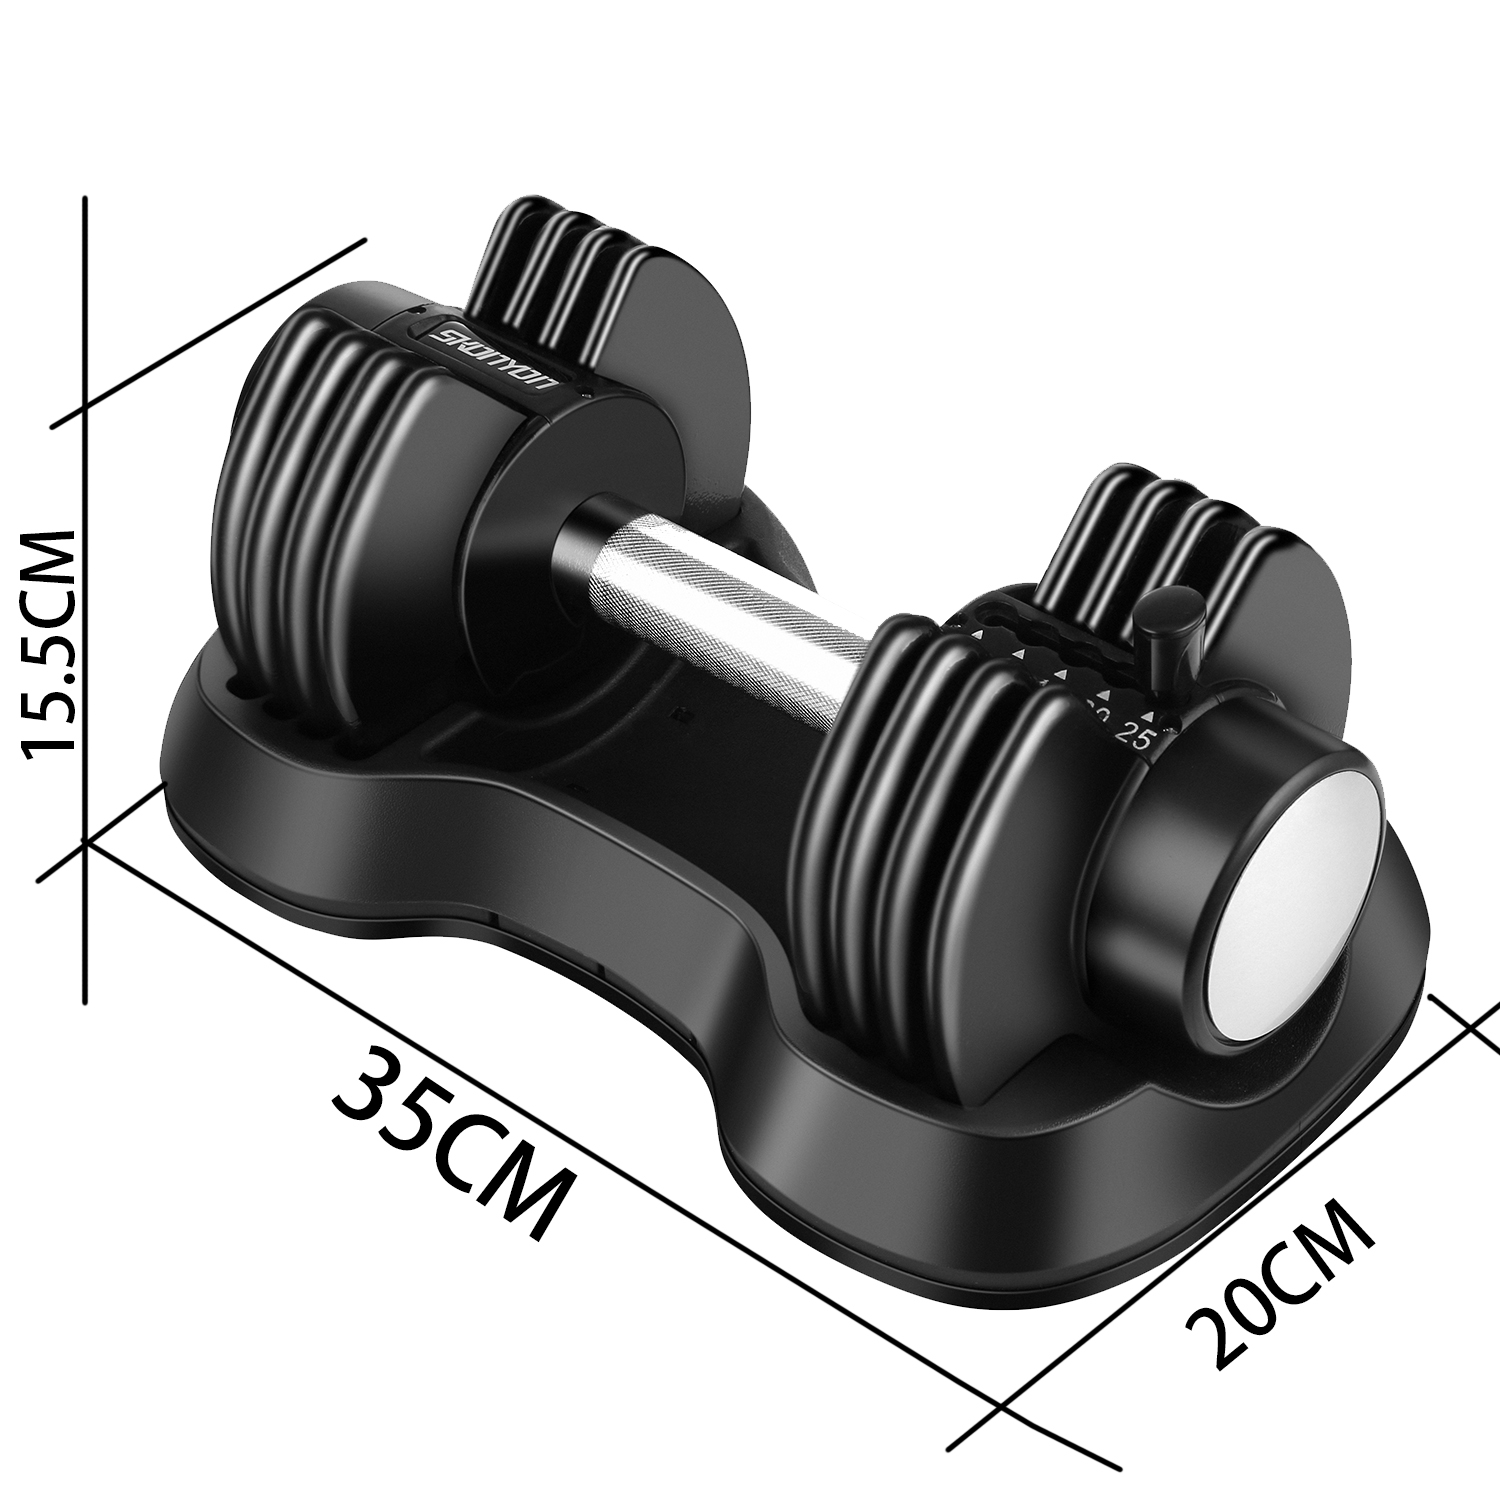 Adjustable Dumbbell Barbell 25 lbs Weight with Handle and Weight Plate for Gym and Home, Black, Single - image 3 of 8